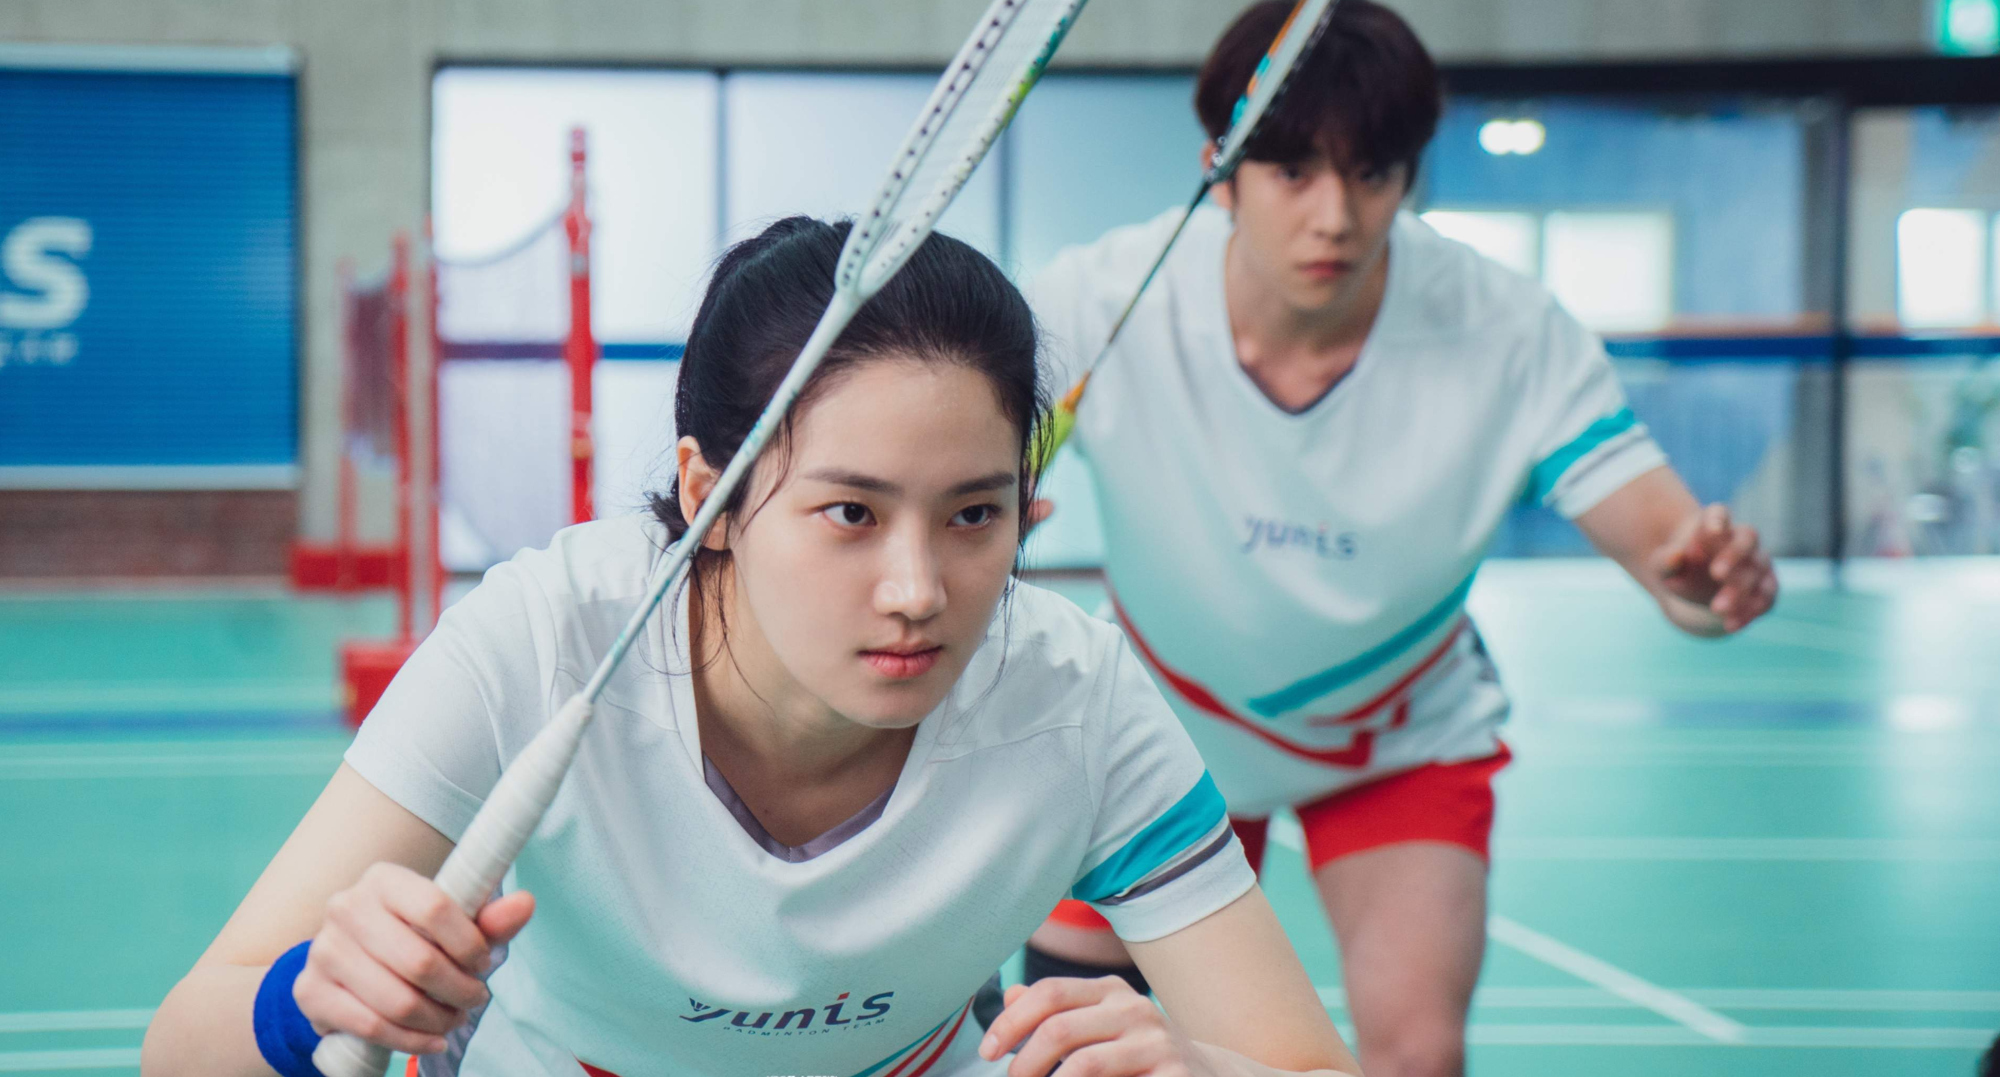 6 Sports Romance KDramas to Fall in Love With